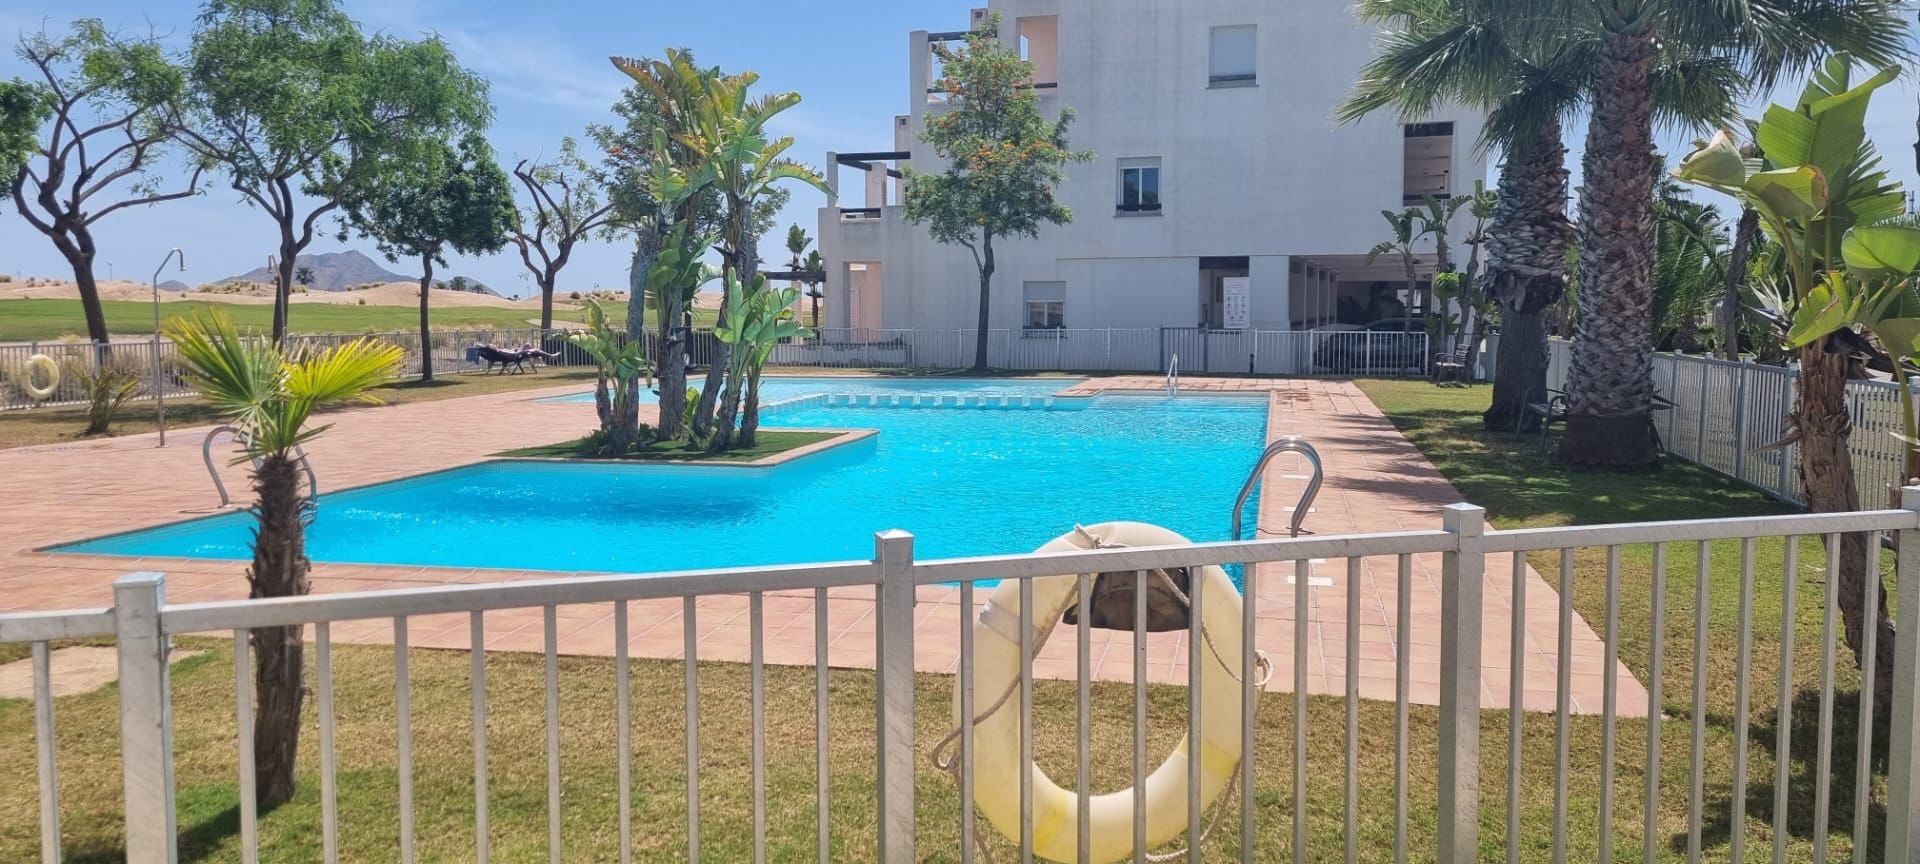 For sale: 2 bedroom apartment / flat in Torre-Pacheco